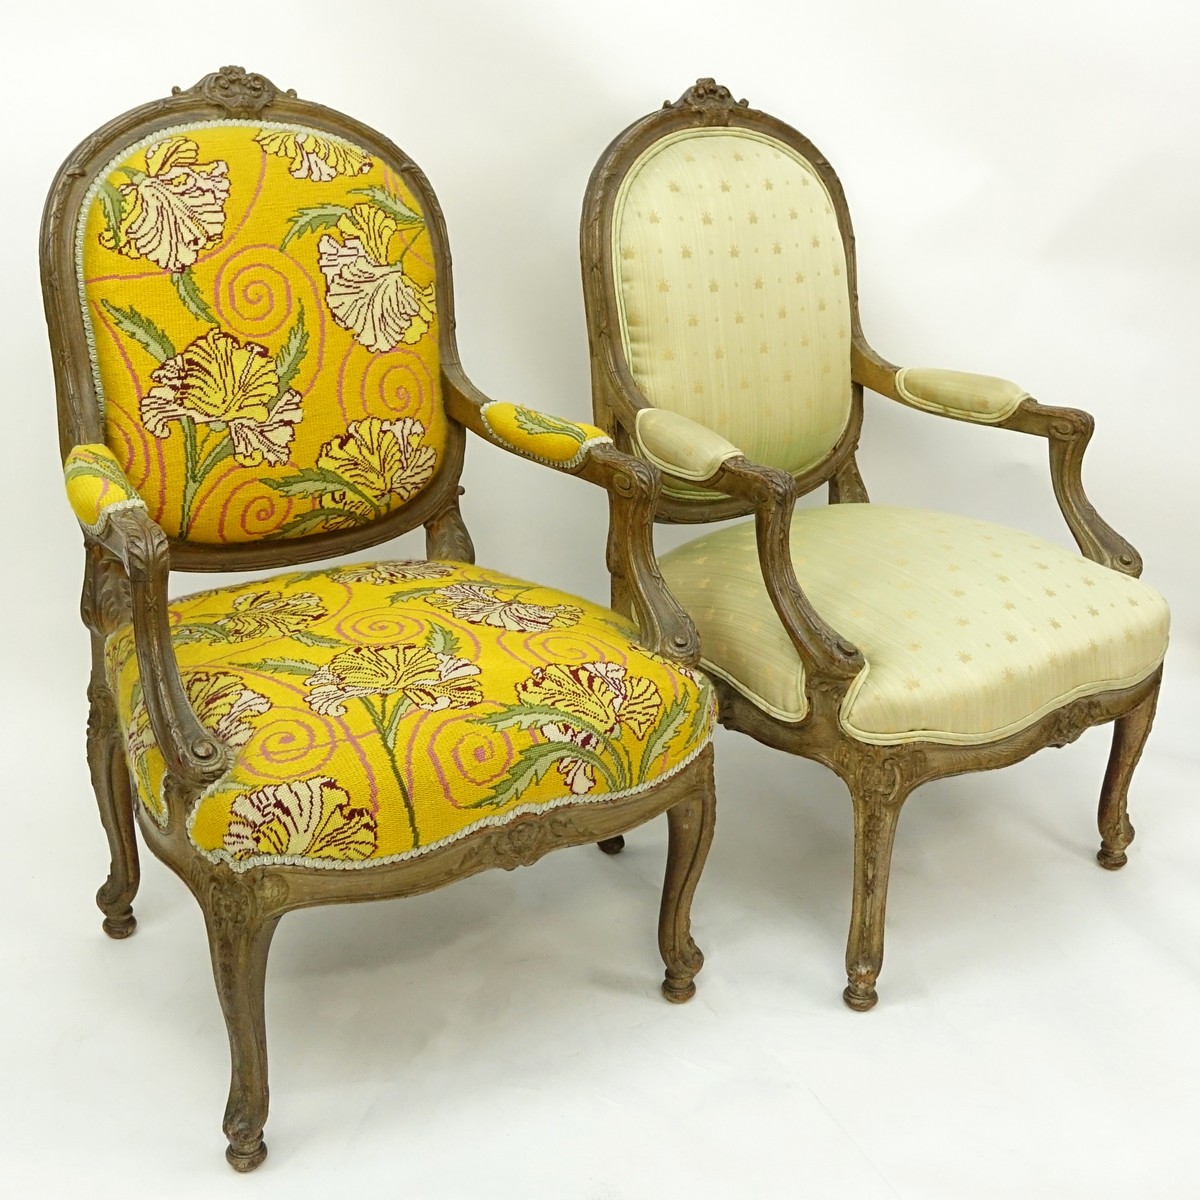 Pair of Louis XV Style  French Carved Wood and Upholstered Fauteuil Chairs. Good condition.